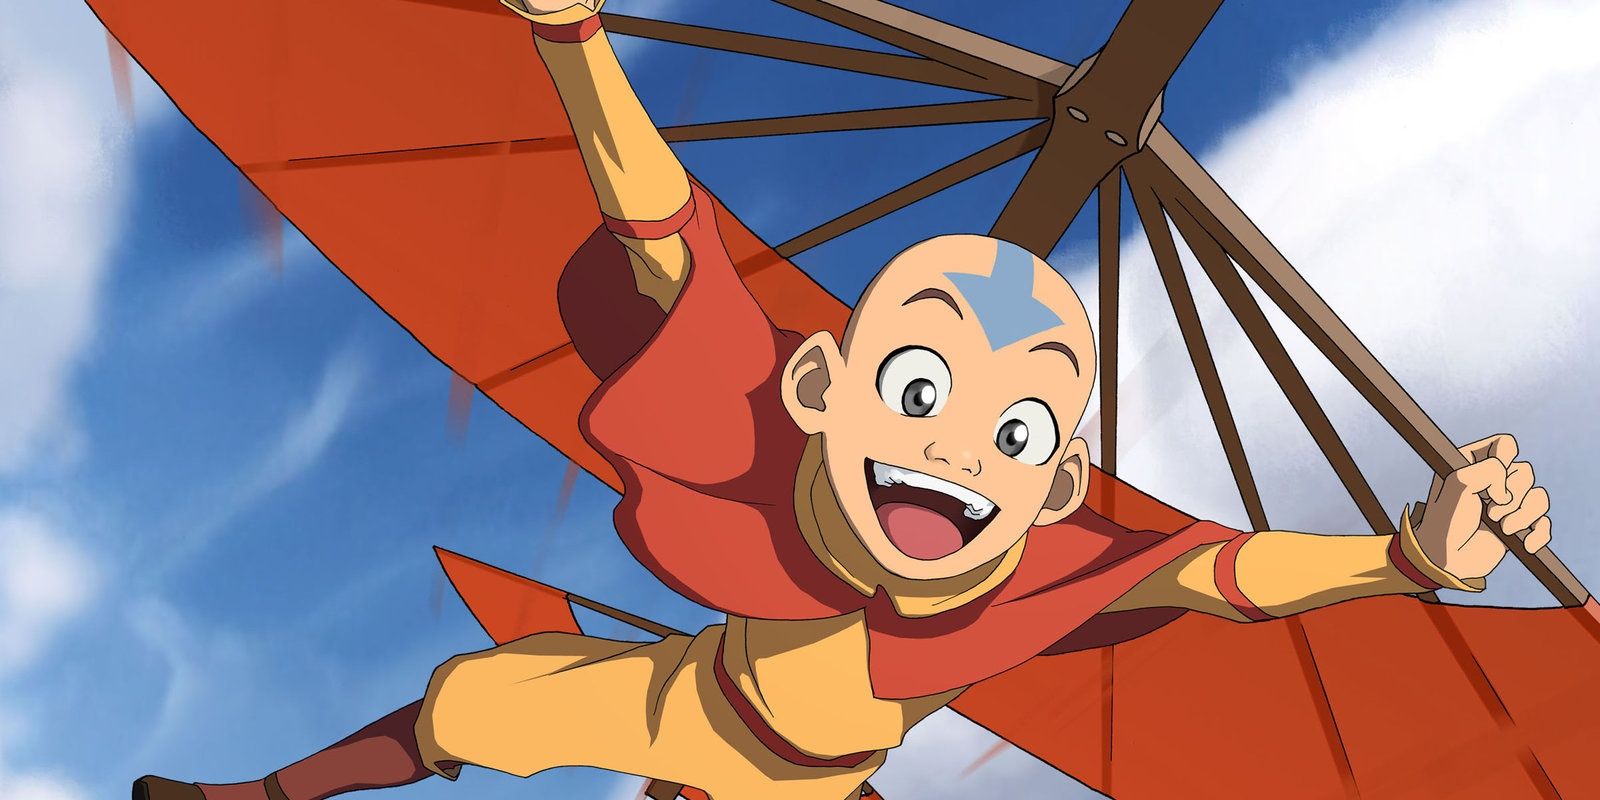 Avatar The Last Airbender – 5 Quotes That Prove Aang Is A Ravenclaw (& 5 That Disprove This)